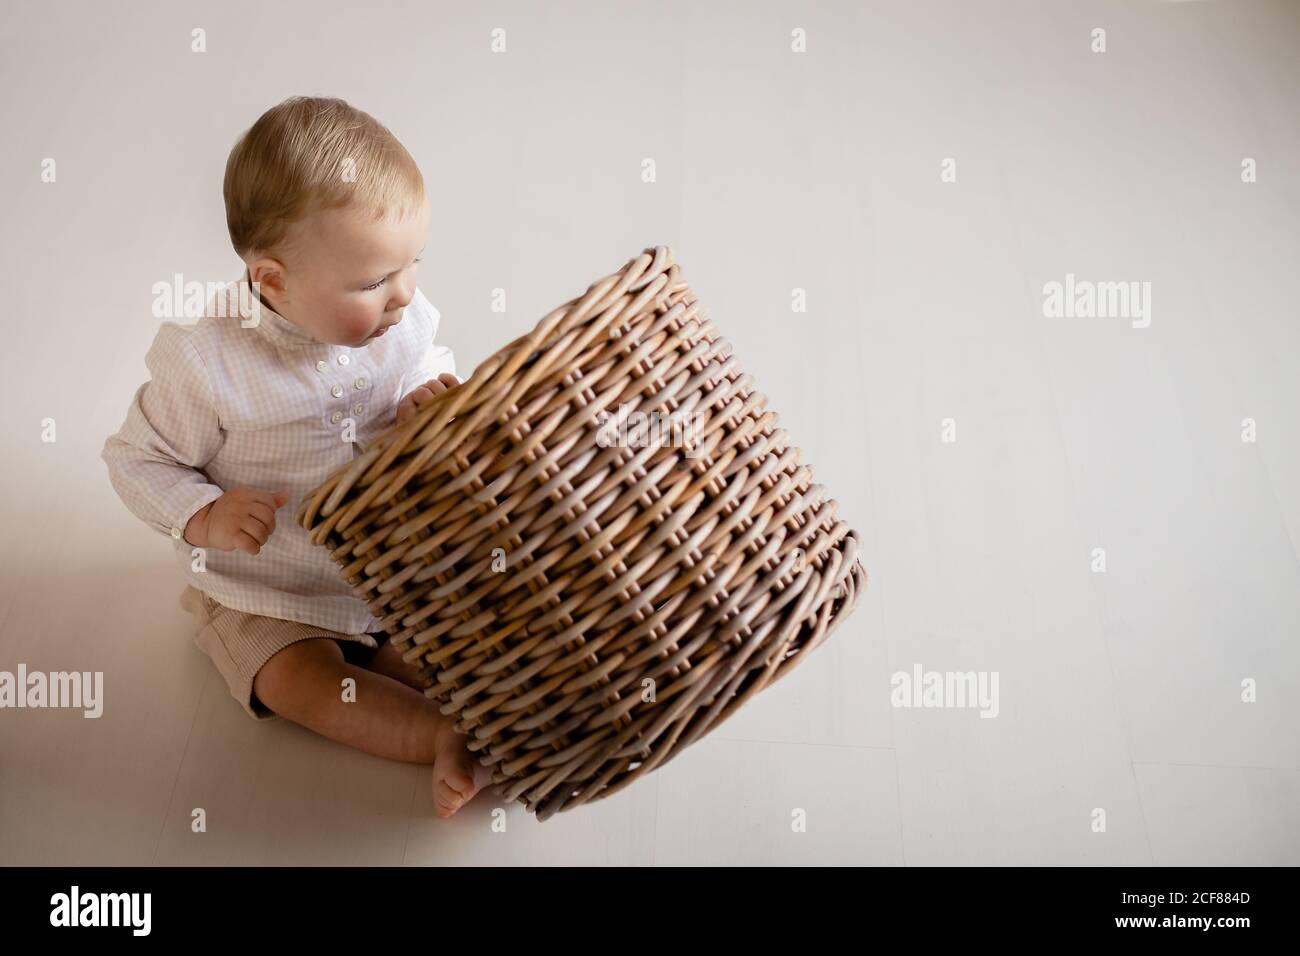 Curious little kid in casual wear sitting barefoot on floor at home and taking plush toys from wicker basket Stock Photo